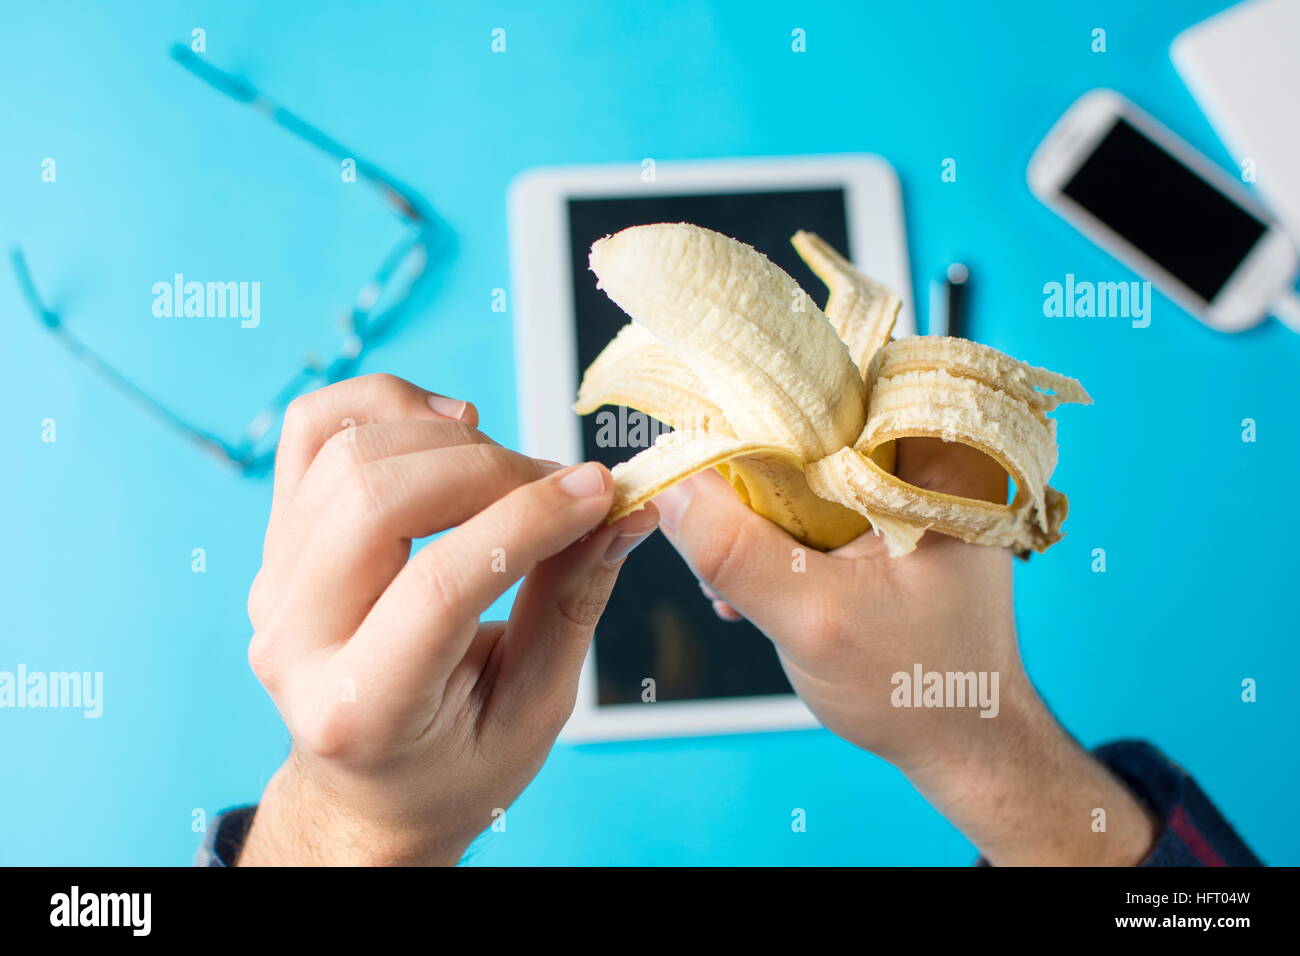 male hand peeling a banana at work in the office Stock Photo